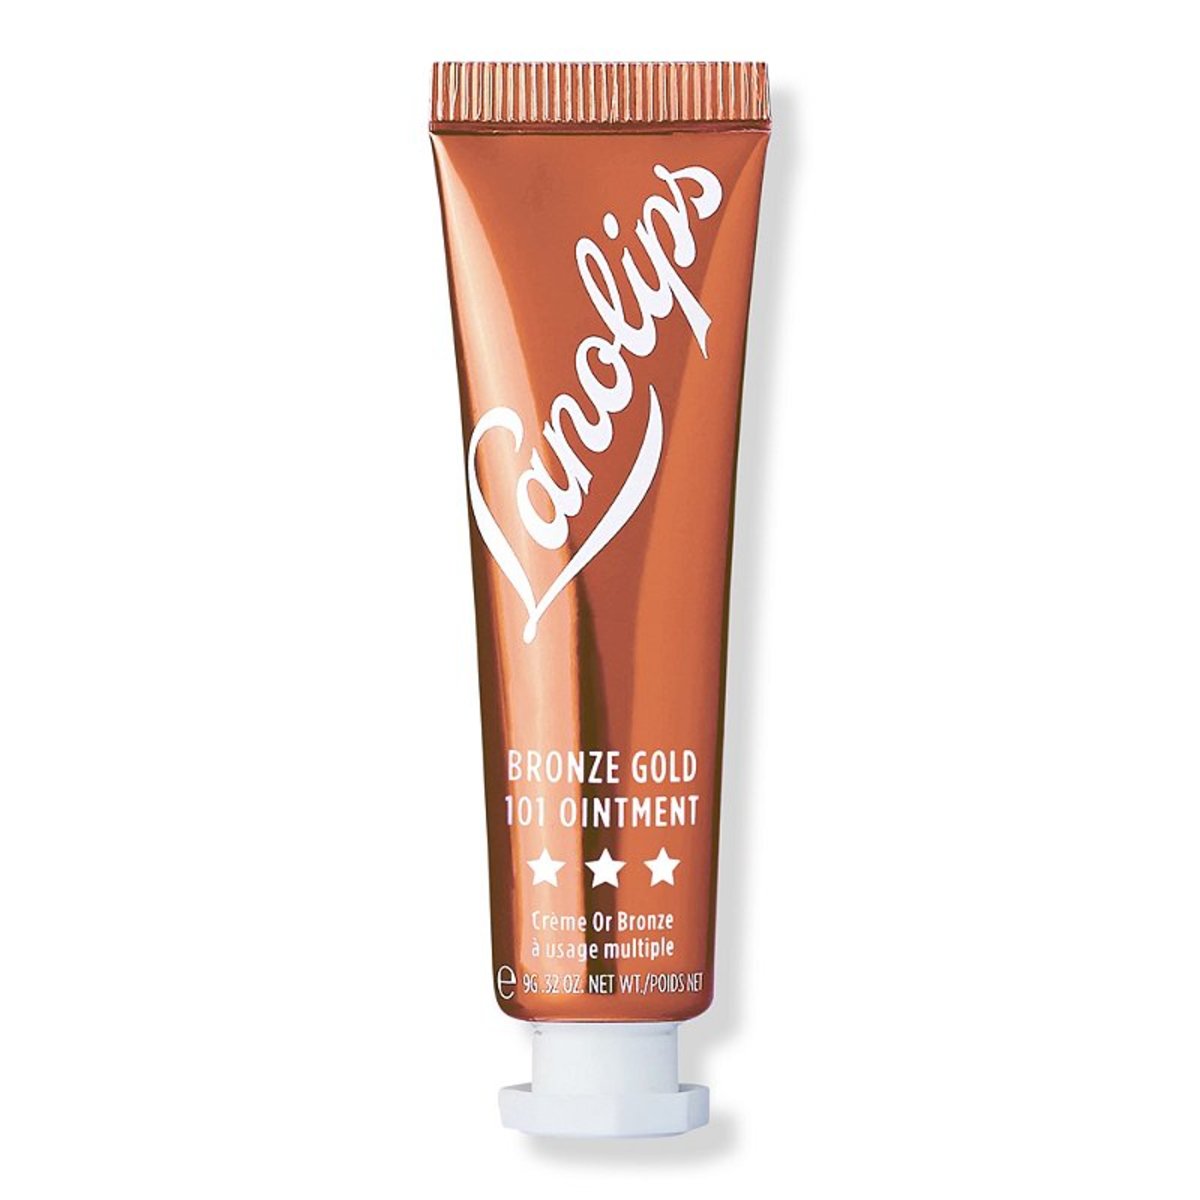 Lanolips Bronze Gold 101 Ointment, $17, available here.